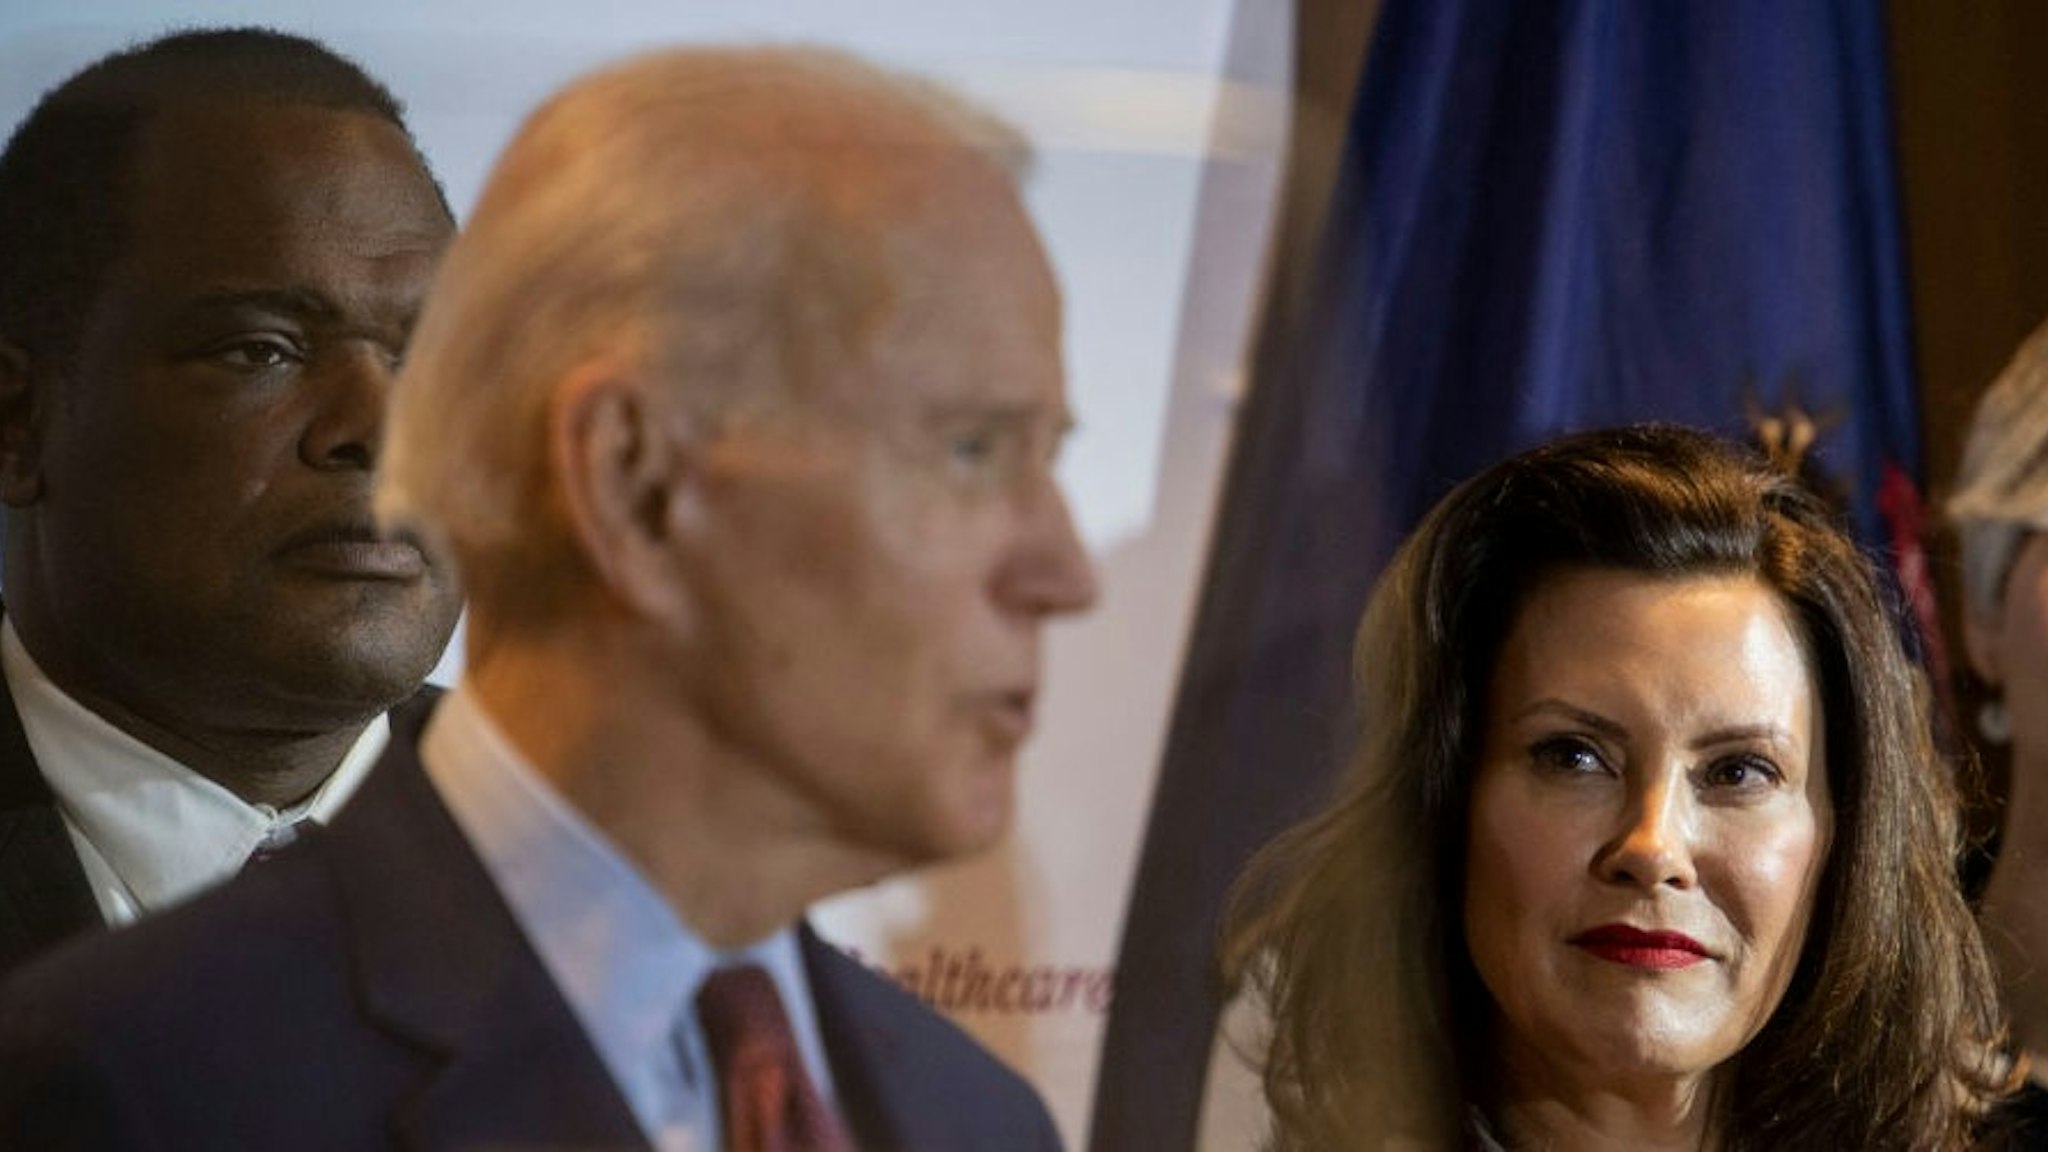 Former Vice President Joe Biden speaks as Michigan Governor Gretchen Whitmer looks on at an event at Cherry Health in Grand Rapids, MI on March 9, 2020. (Photo by